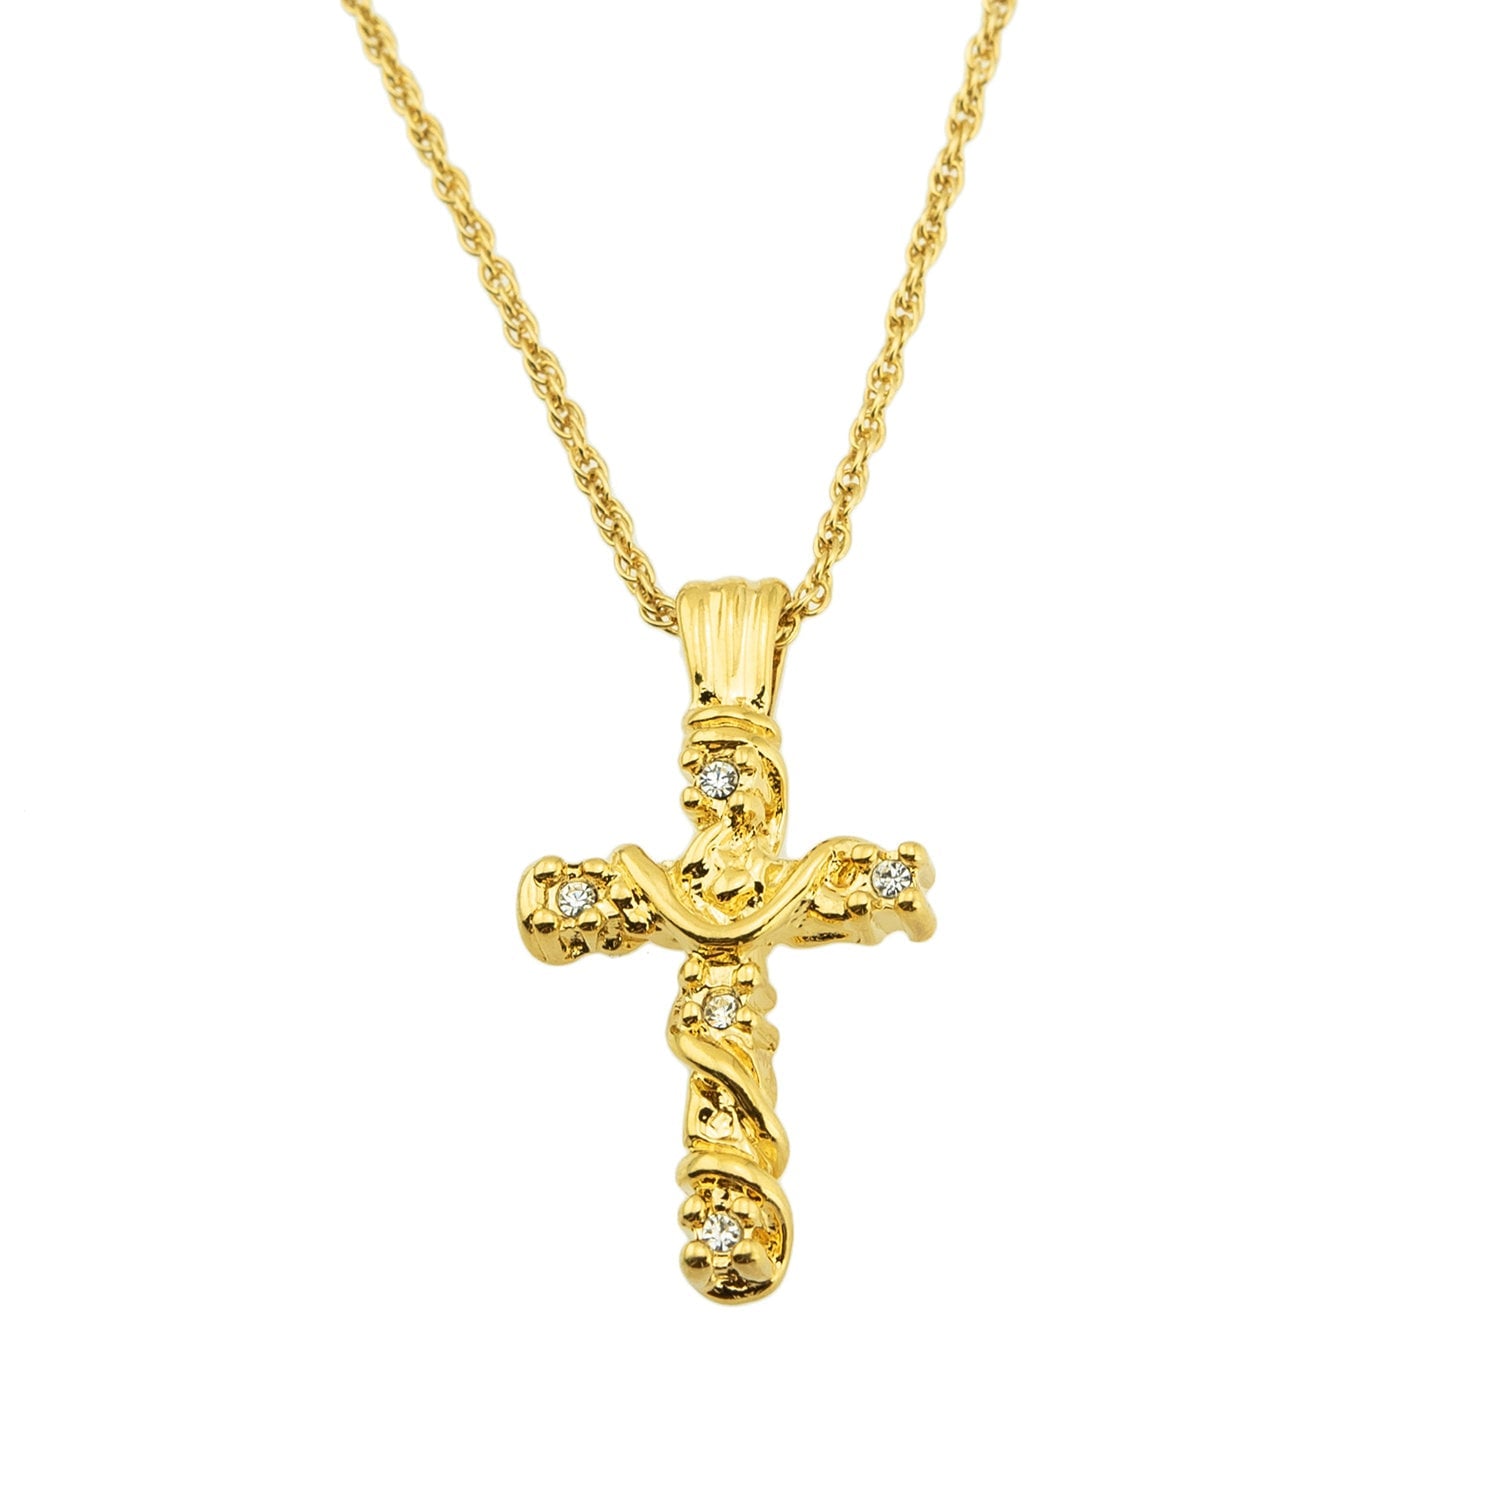 Vintage Cross Pendant with Swarovski Crystals 16in Gold Plated Pendant Necklace Antique Jewlery Womans #N624-Y - Limited Stock - Never Worn